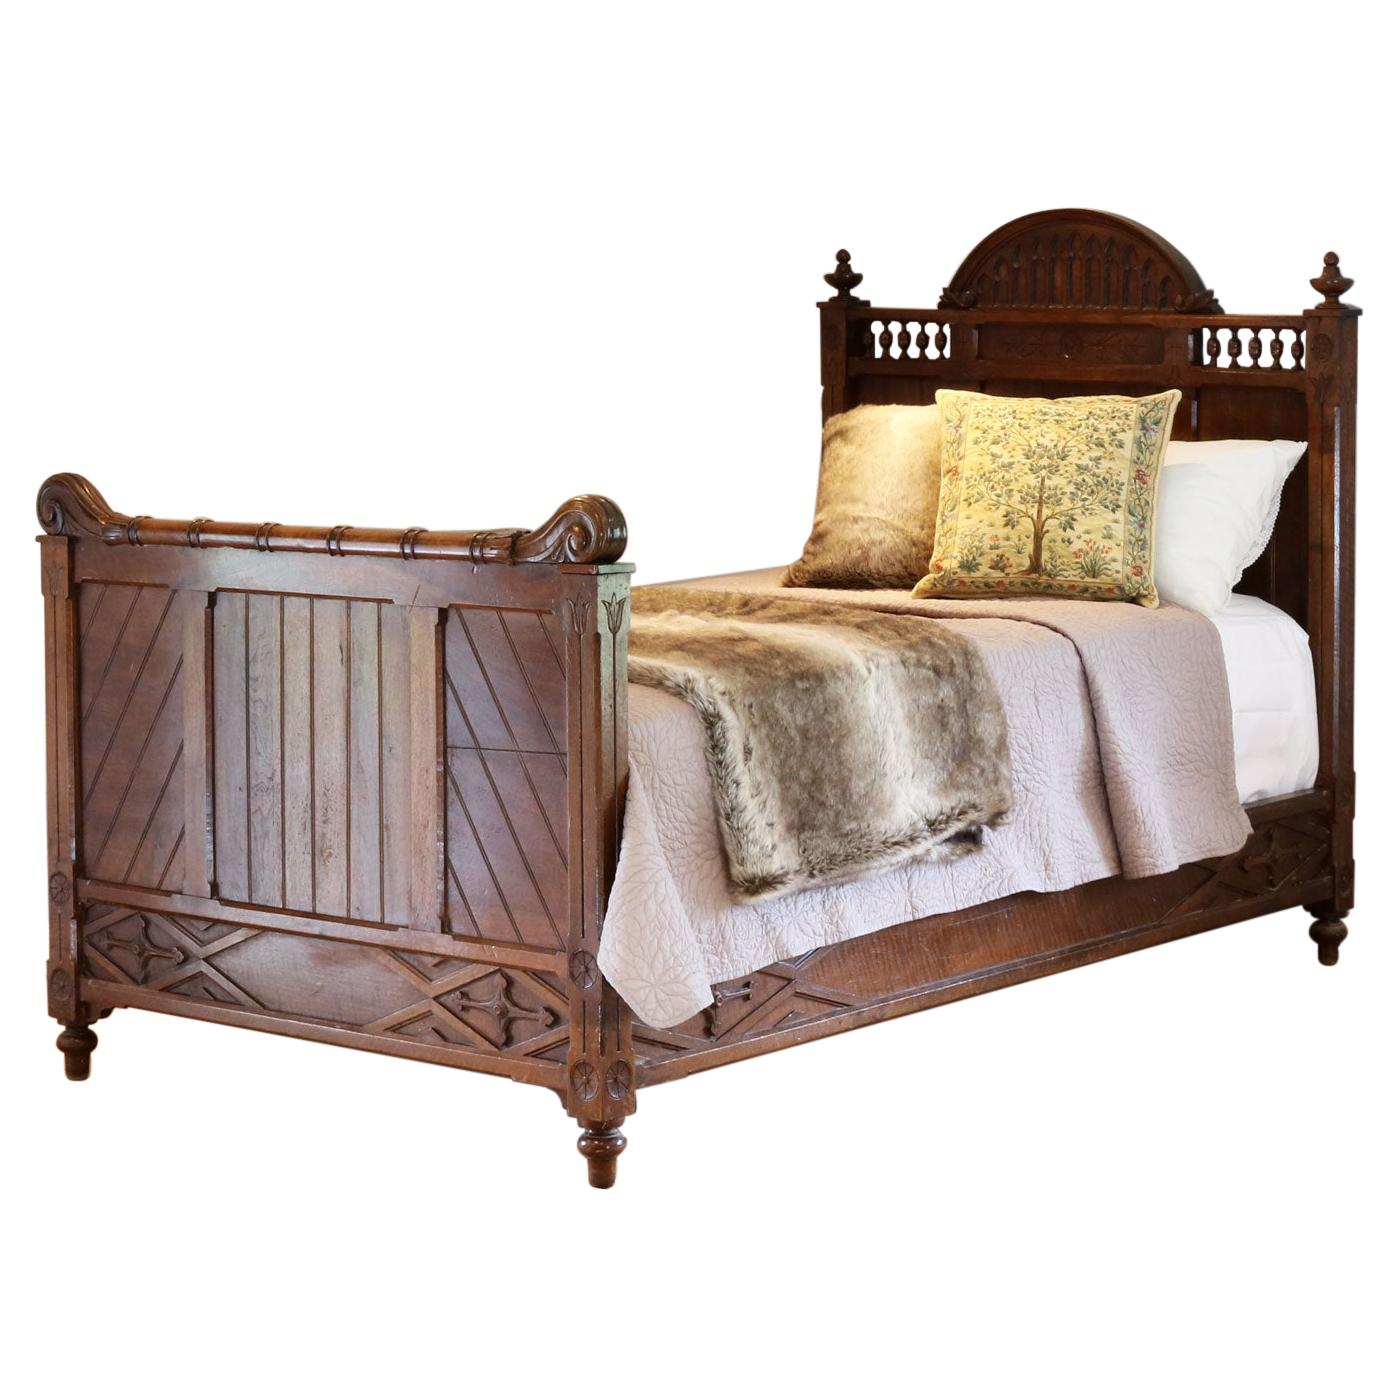 https://a.1stdibscdn.com/gothic-style-single-walnut-antique-bed-ws12-for-sale/1121189/f_238693421622220139279/23869342_master.jpg